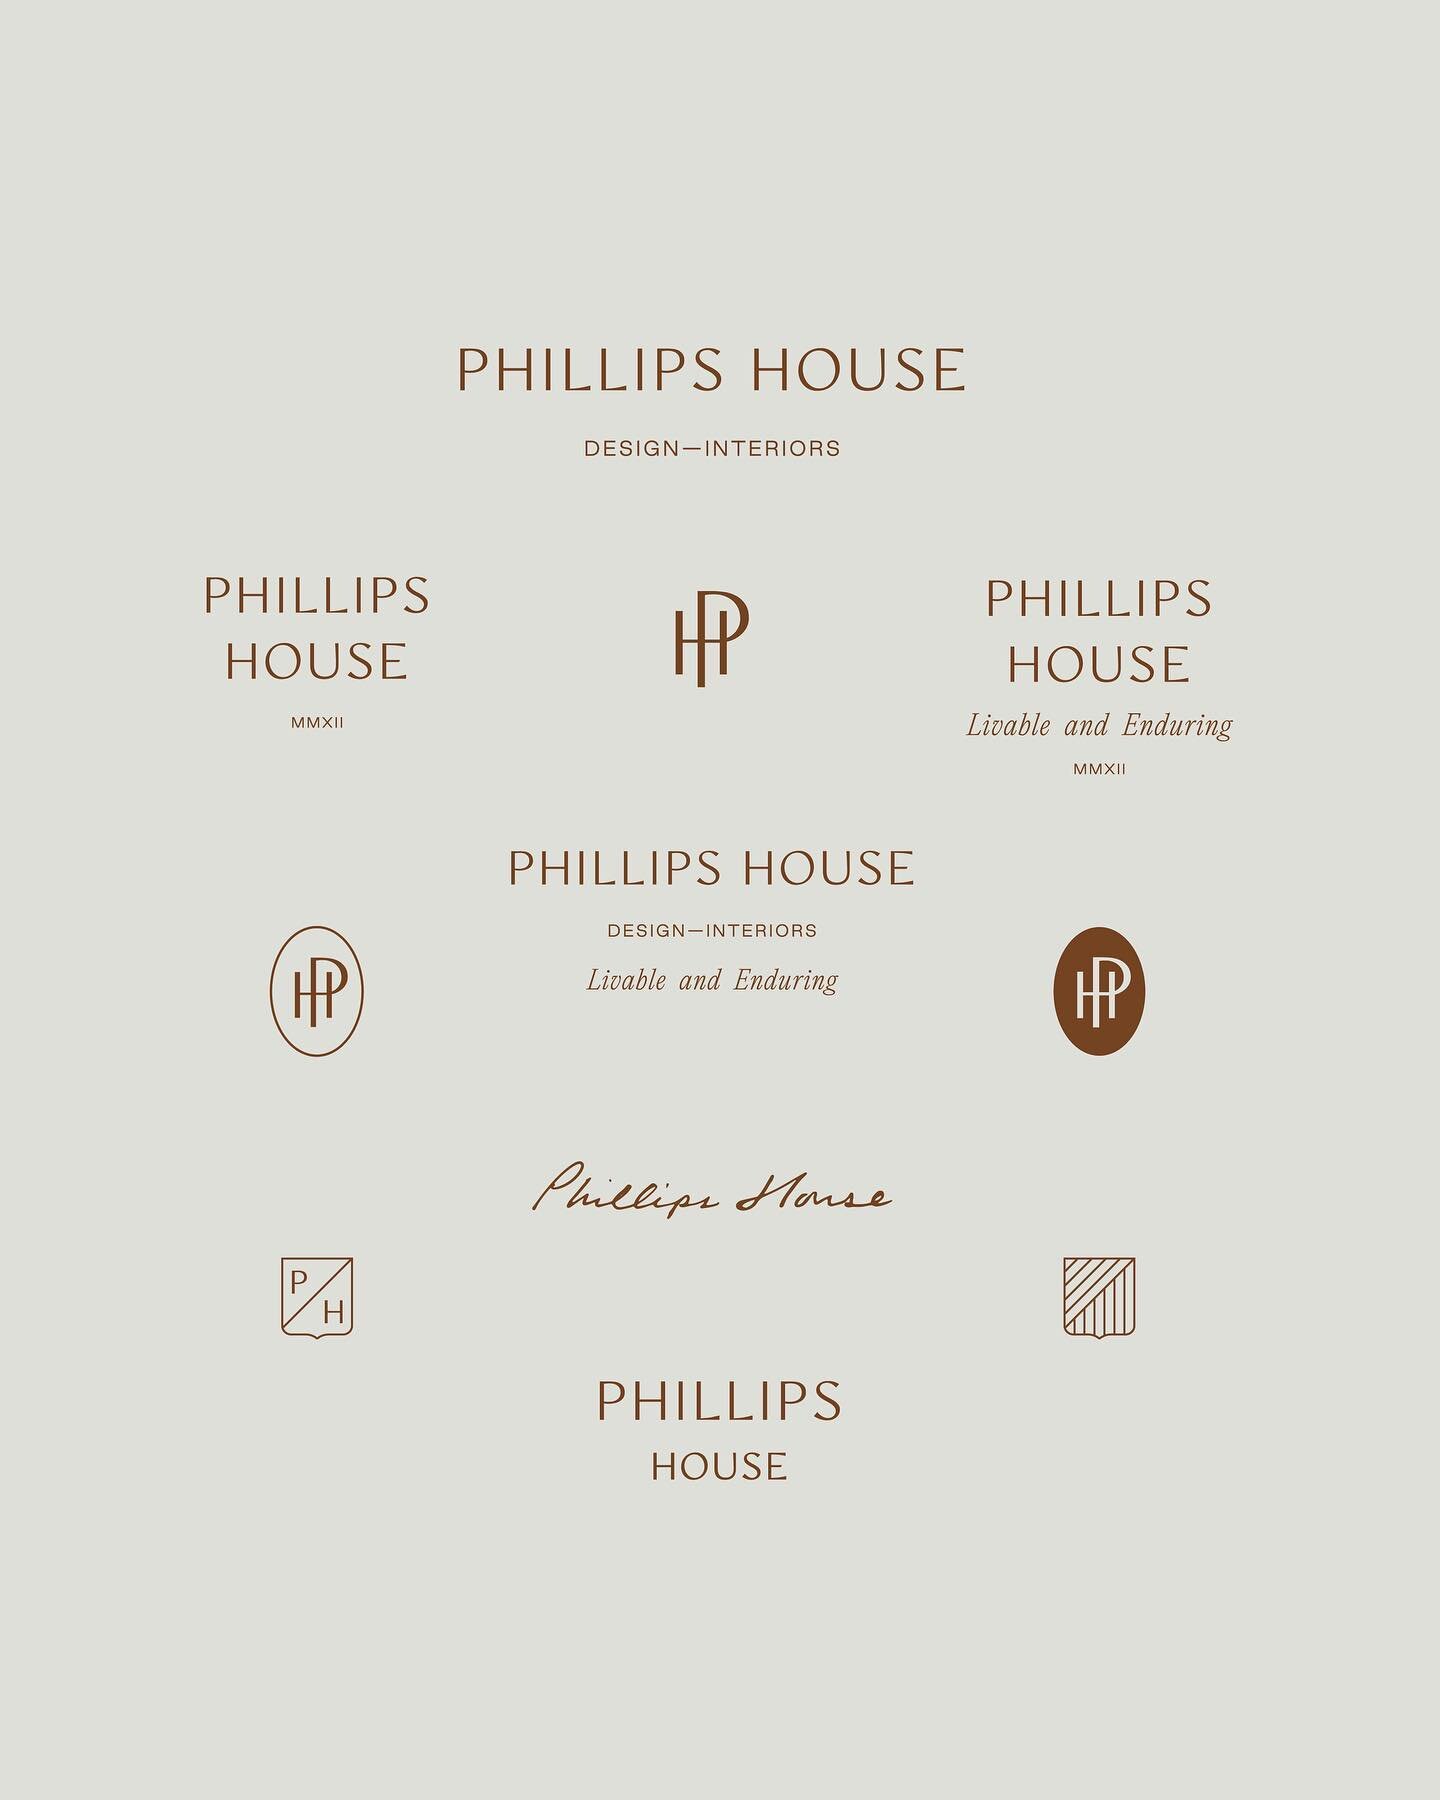 Branding developed in March 2022 for @phillipshouse_ 

#brandidentity #branddesign #visualidentity #branddevelopment #logodesign #logodesigner #graphicdesign #graphicdesigner #brandingagency #logoinspiration #todayatsaturday #logosai #inspofinds #typ